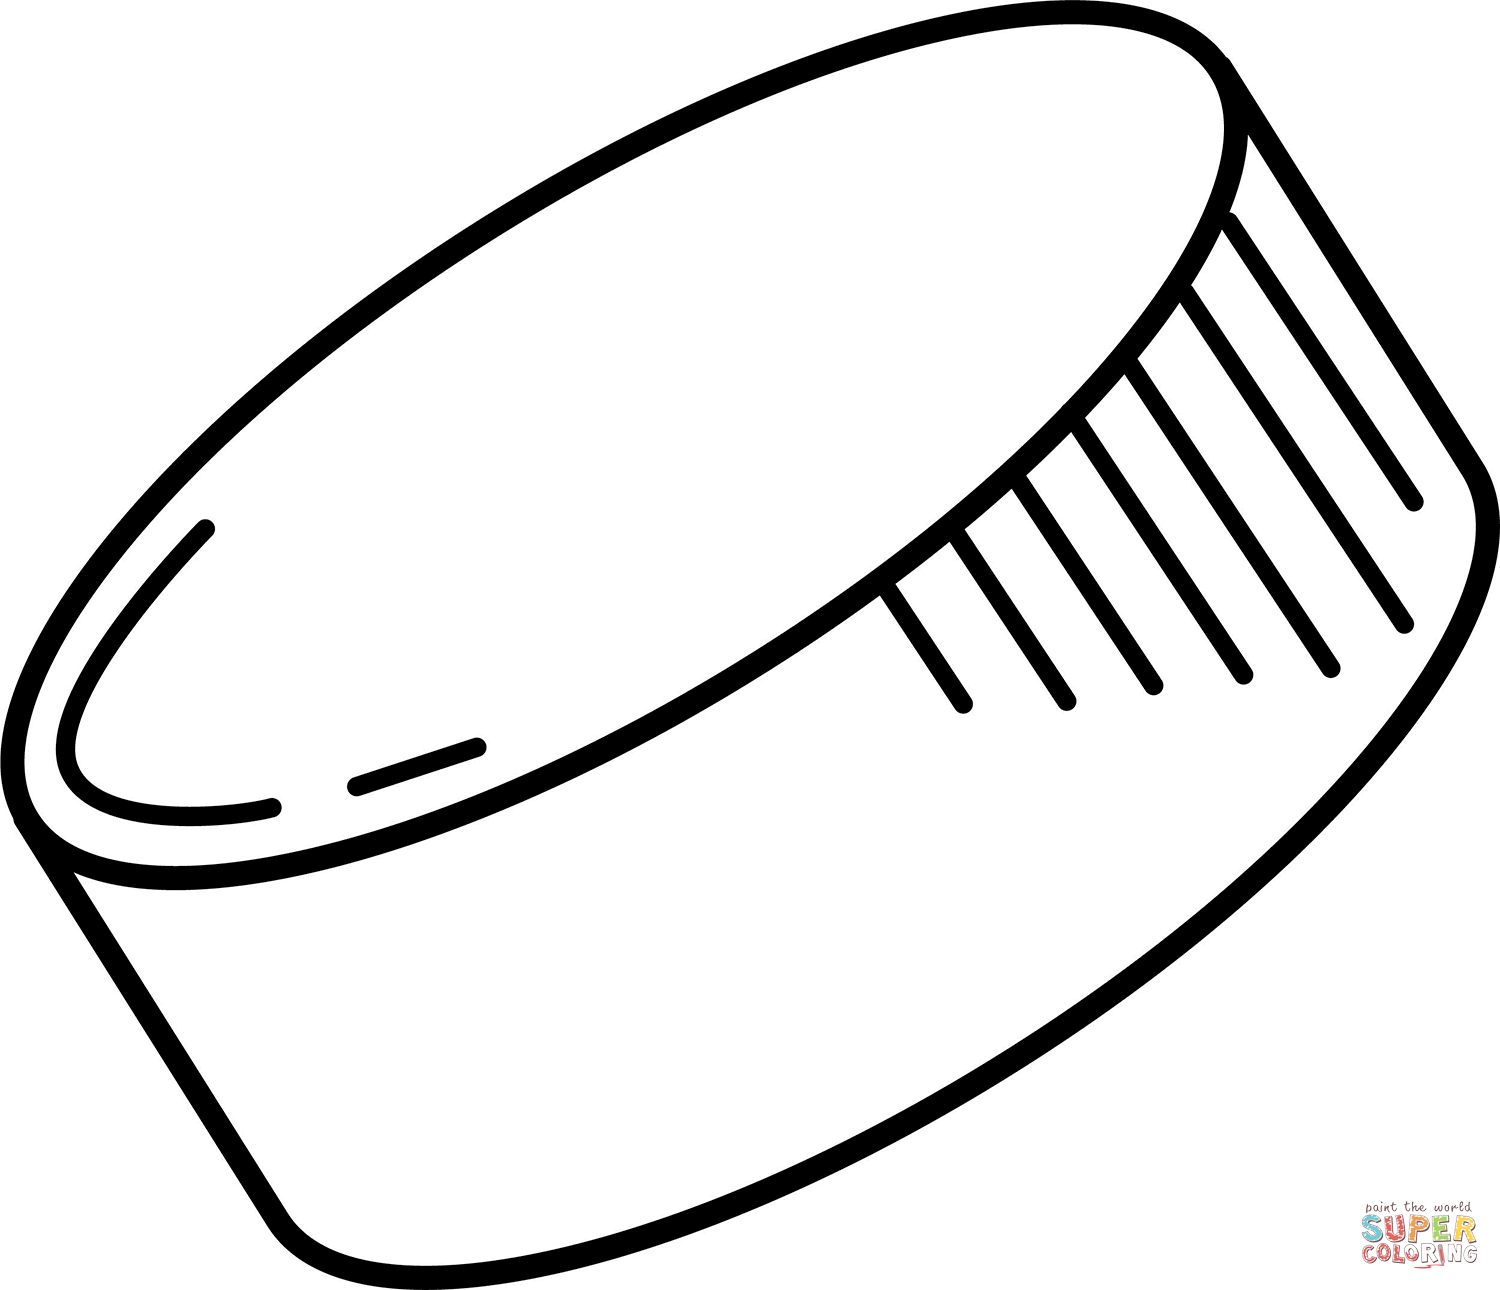 Hockey puck coloring page free printable coloring pages